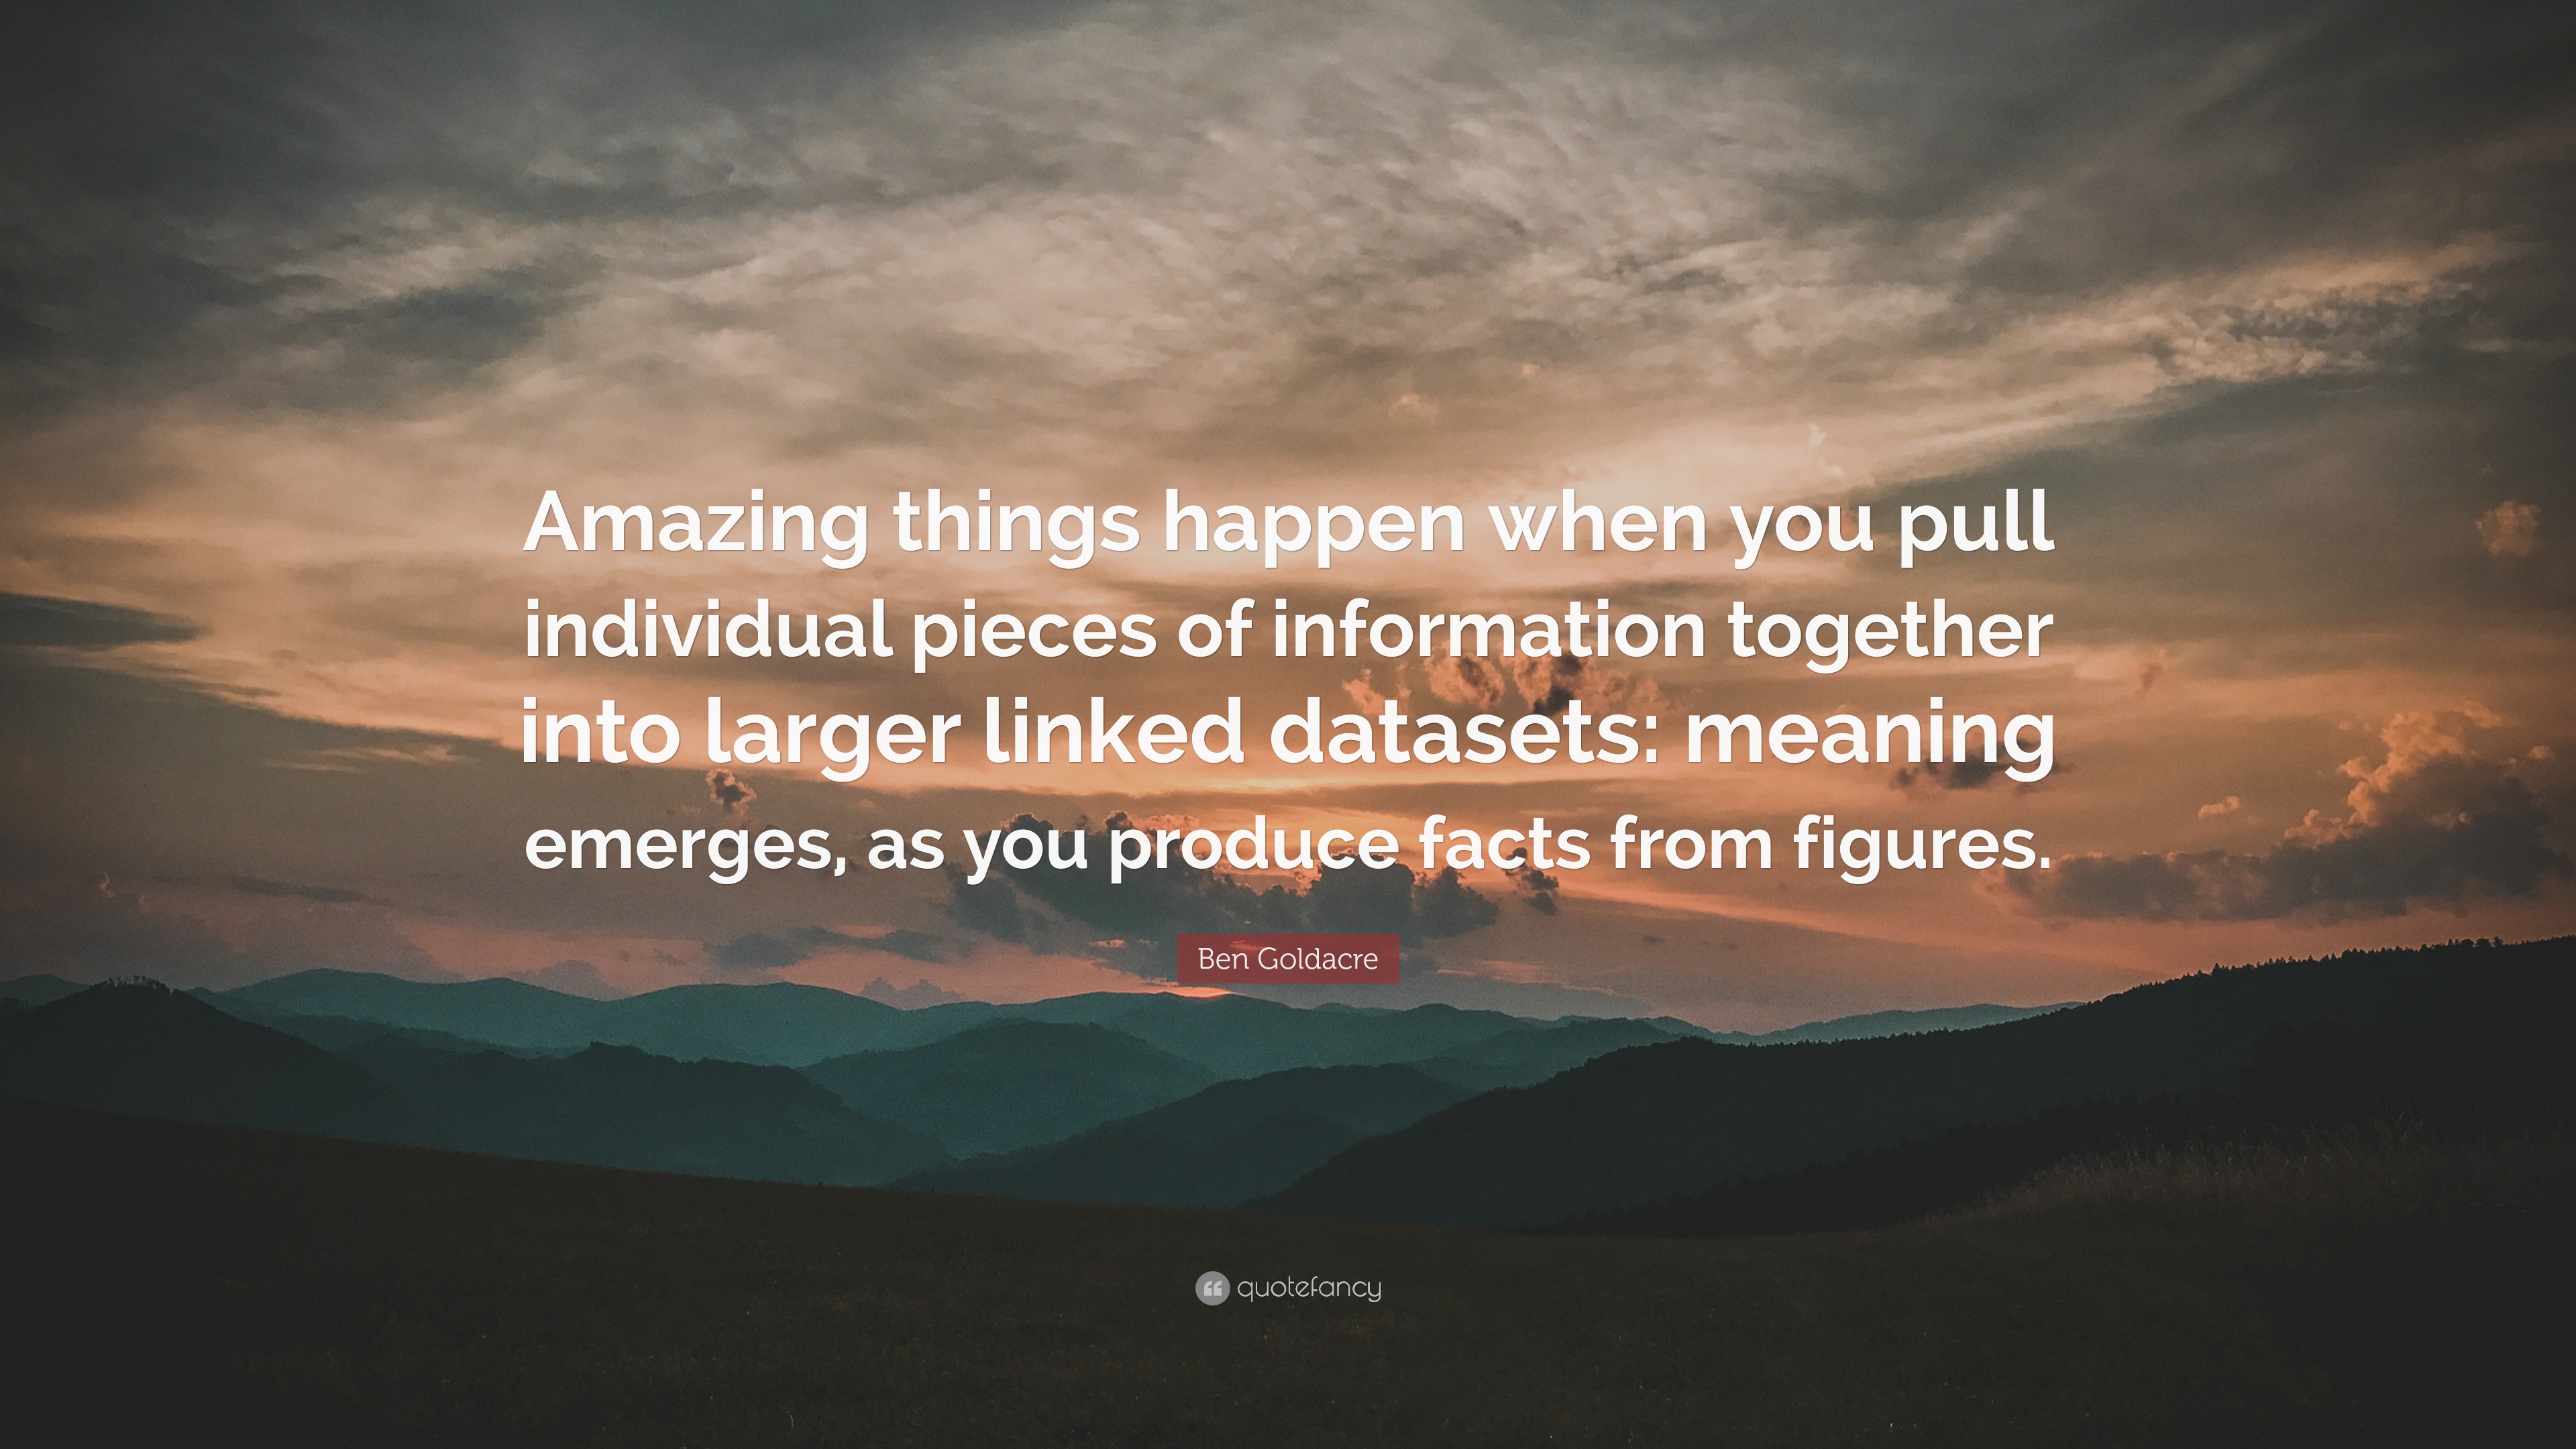 Ben Goldacre Quote: “Amazing things happen when you pull individual ...